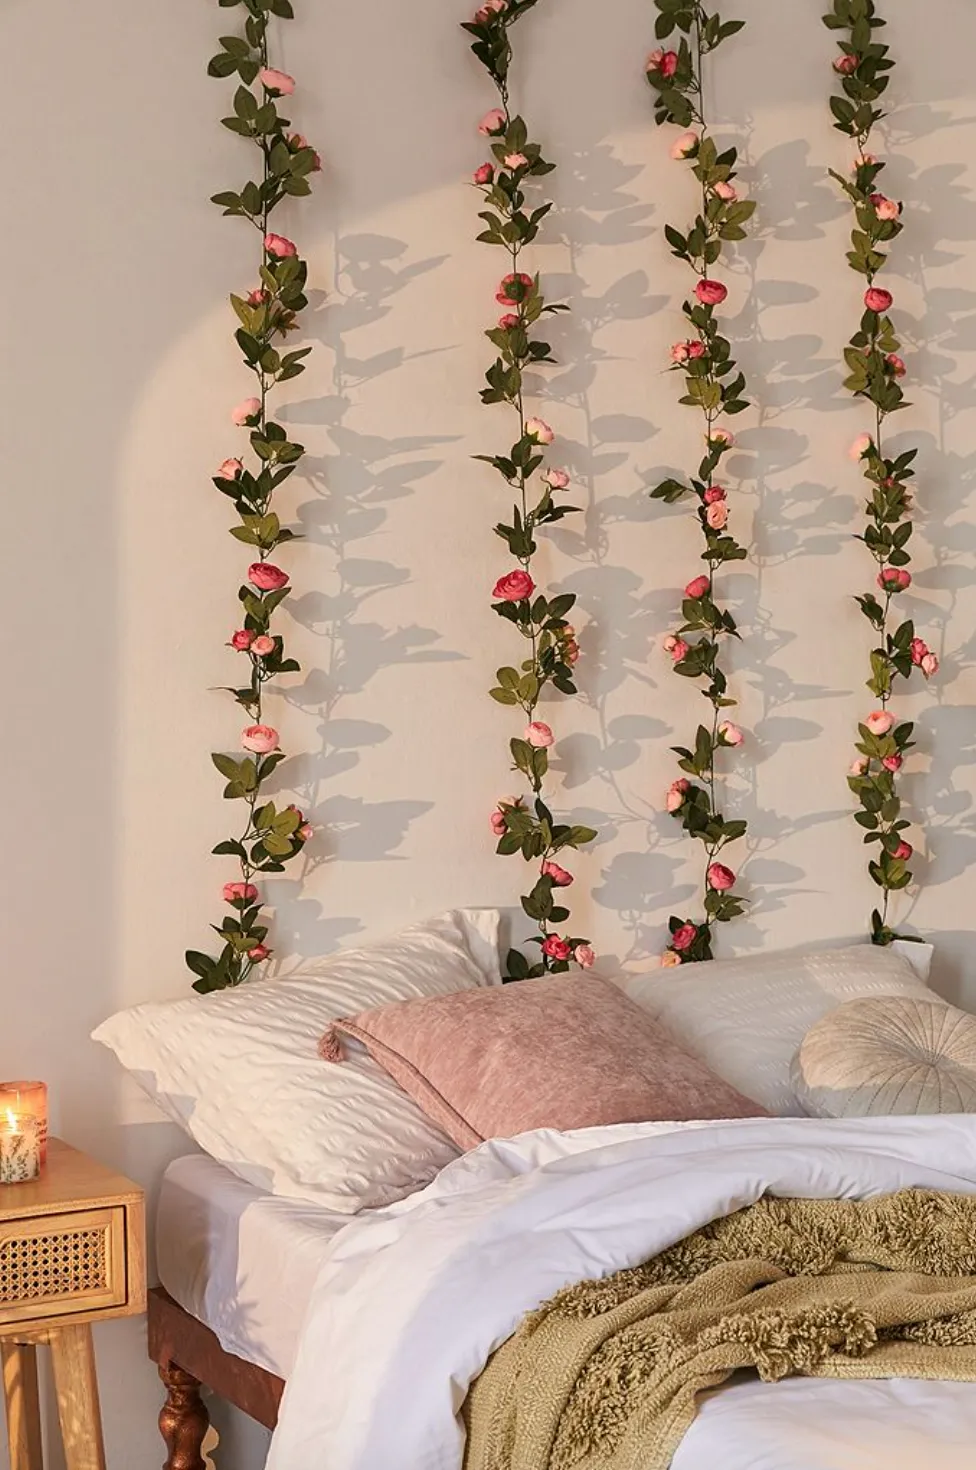 Decorative Pink Rose Vine Garland, £10.00, Urban Outfitters